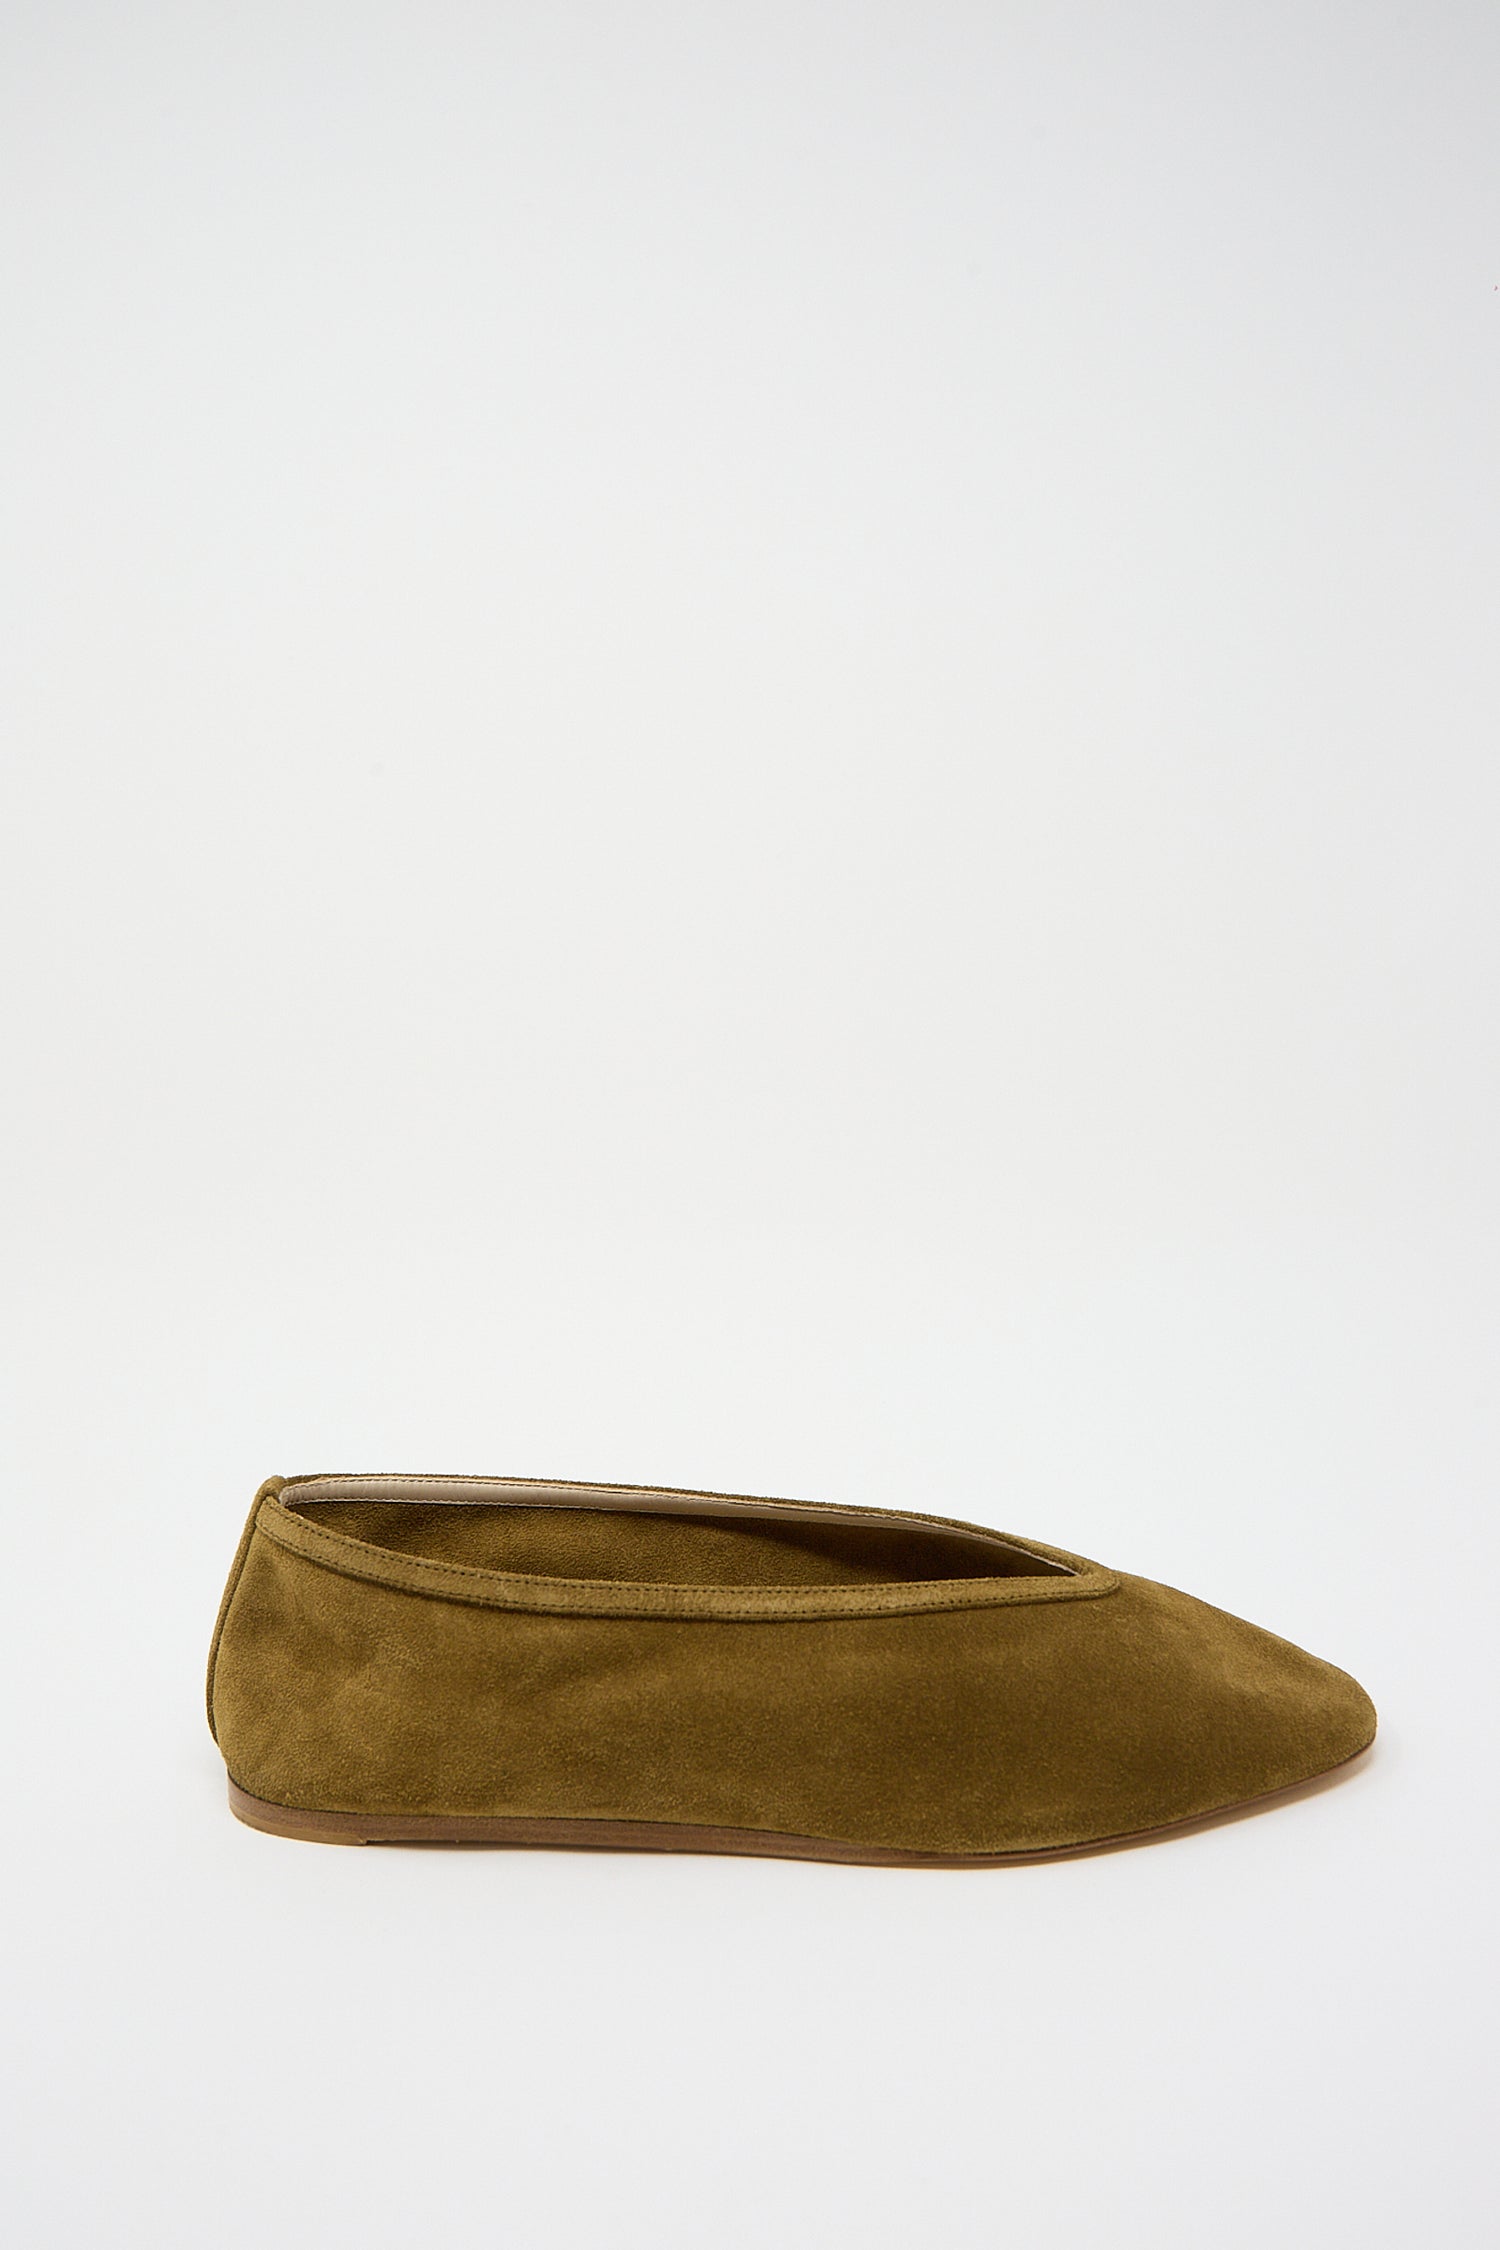 Suede Luna Slipper in Taupe by Le Monde Beryl on a white background. Side profile view.